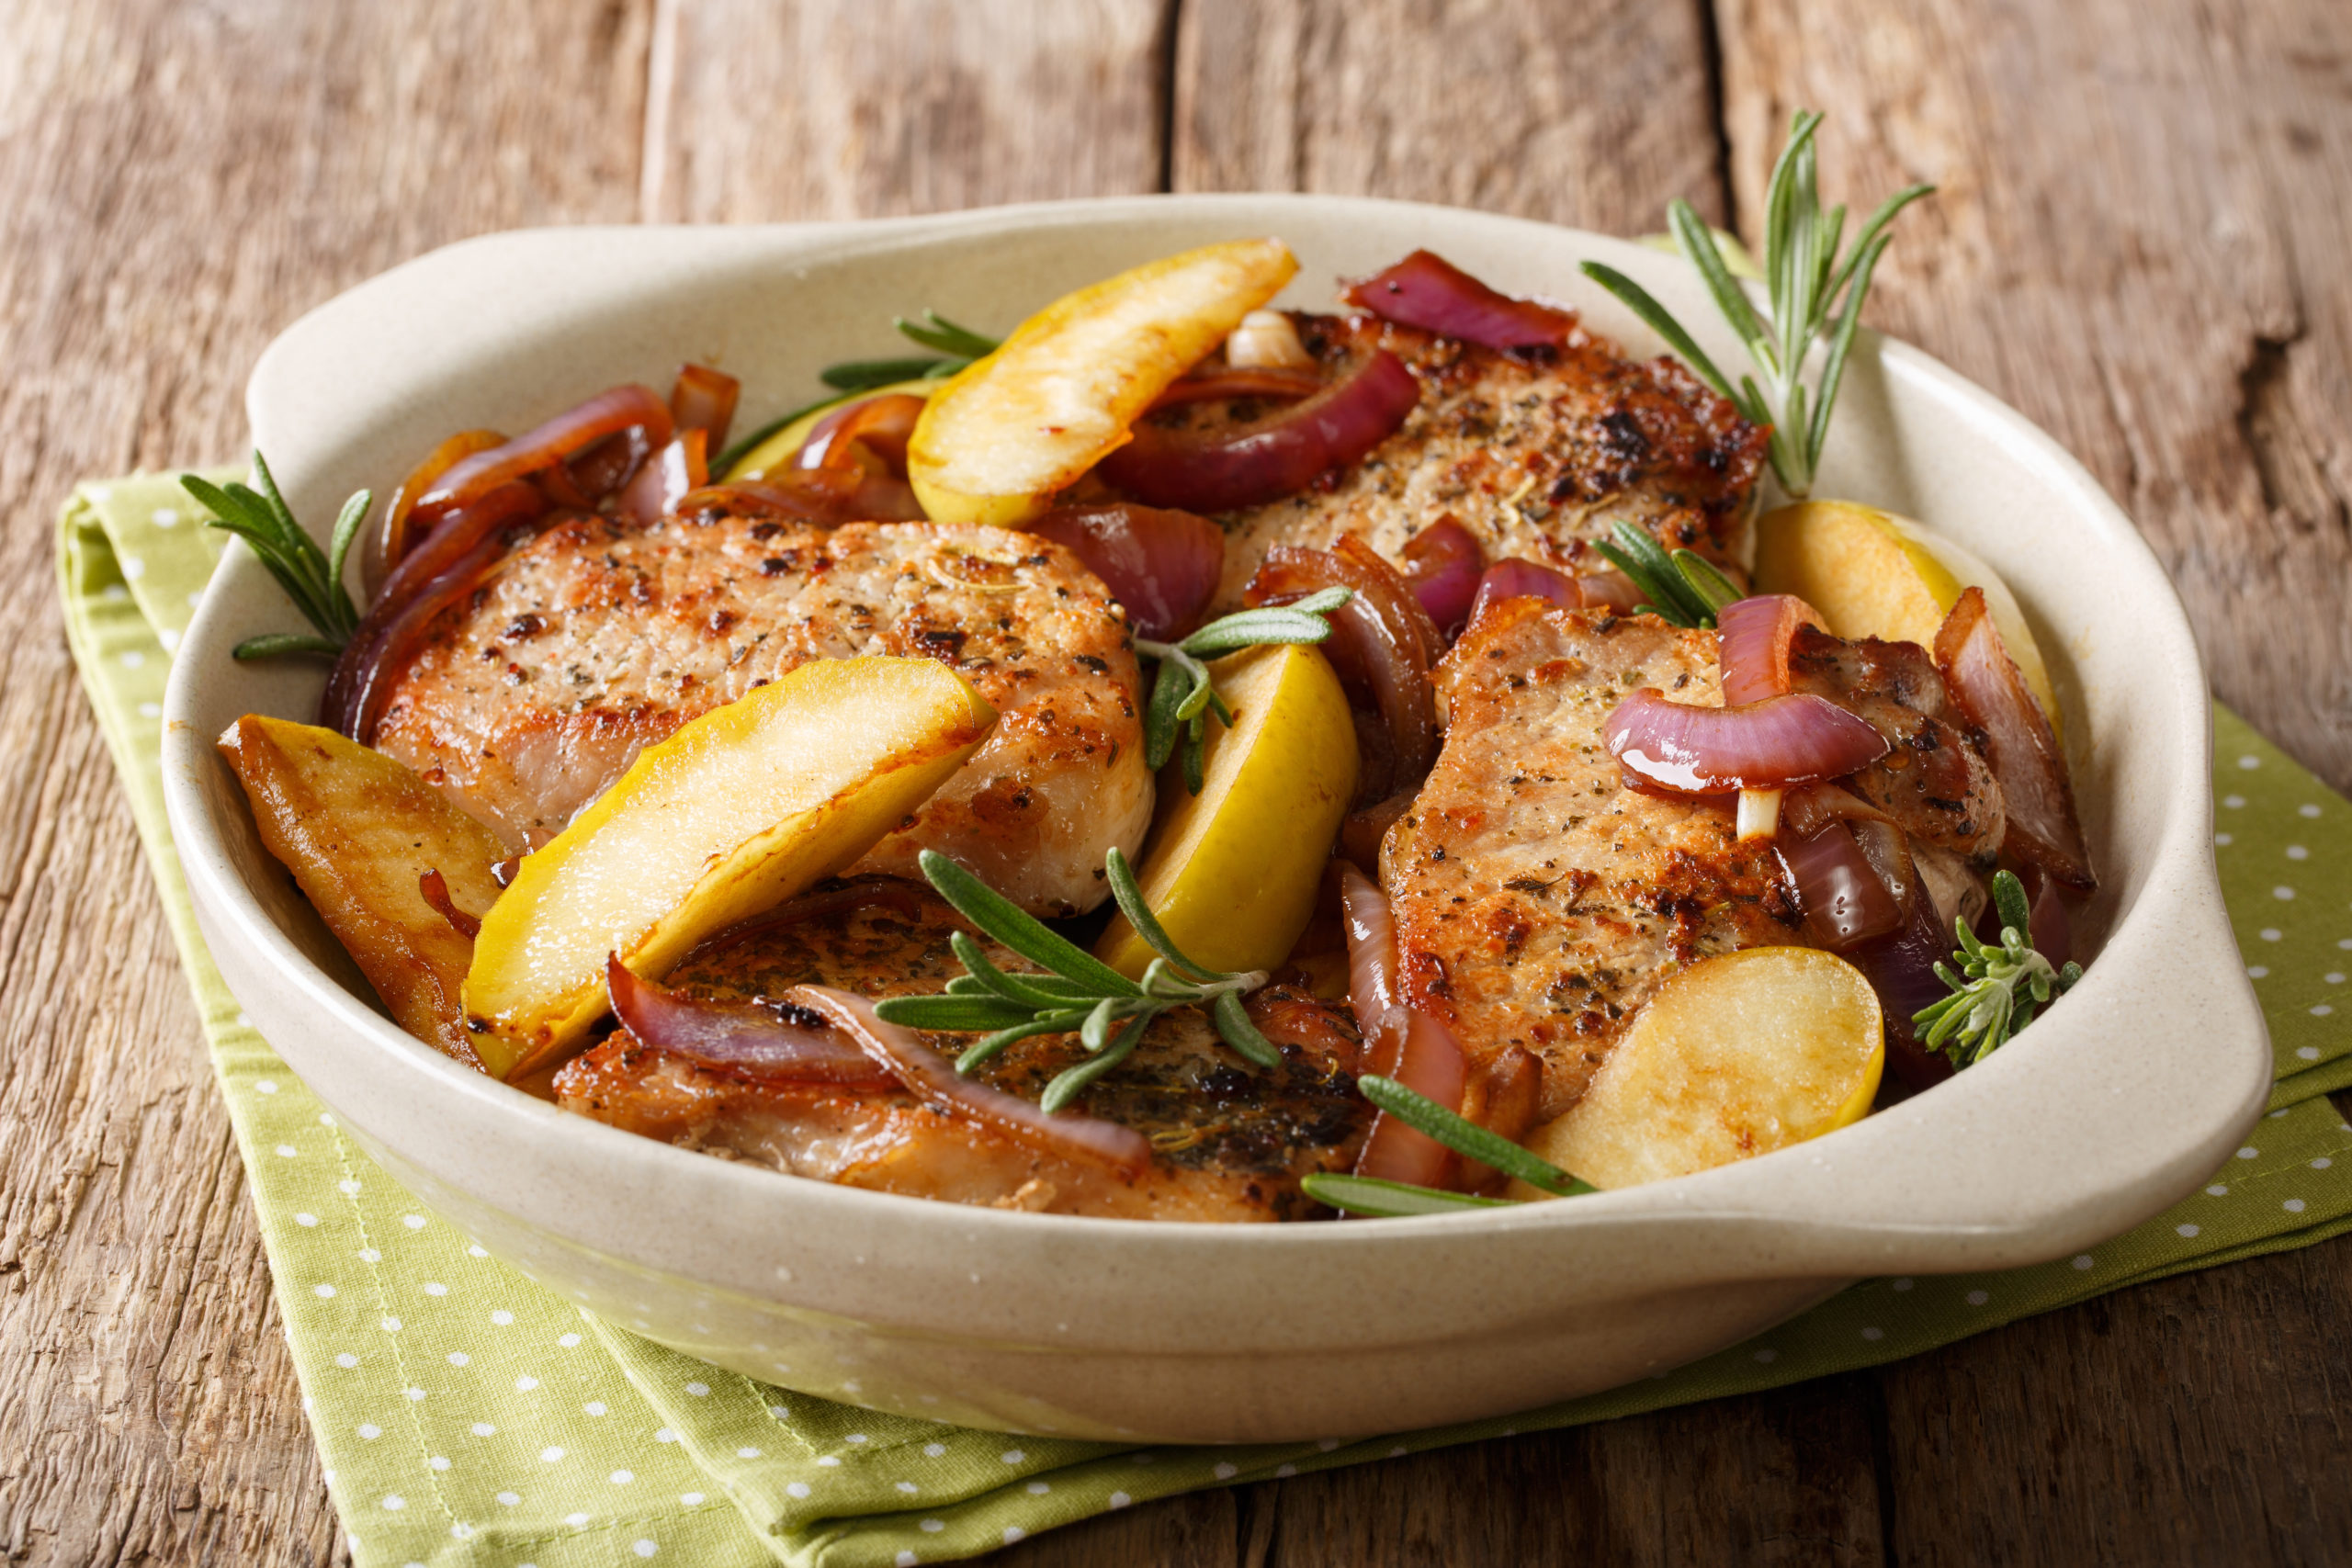 Pan Seared Pork Chops with Caramelized Apples, Onions & Garlic